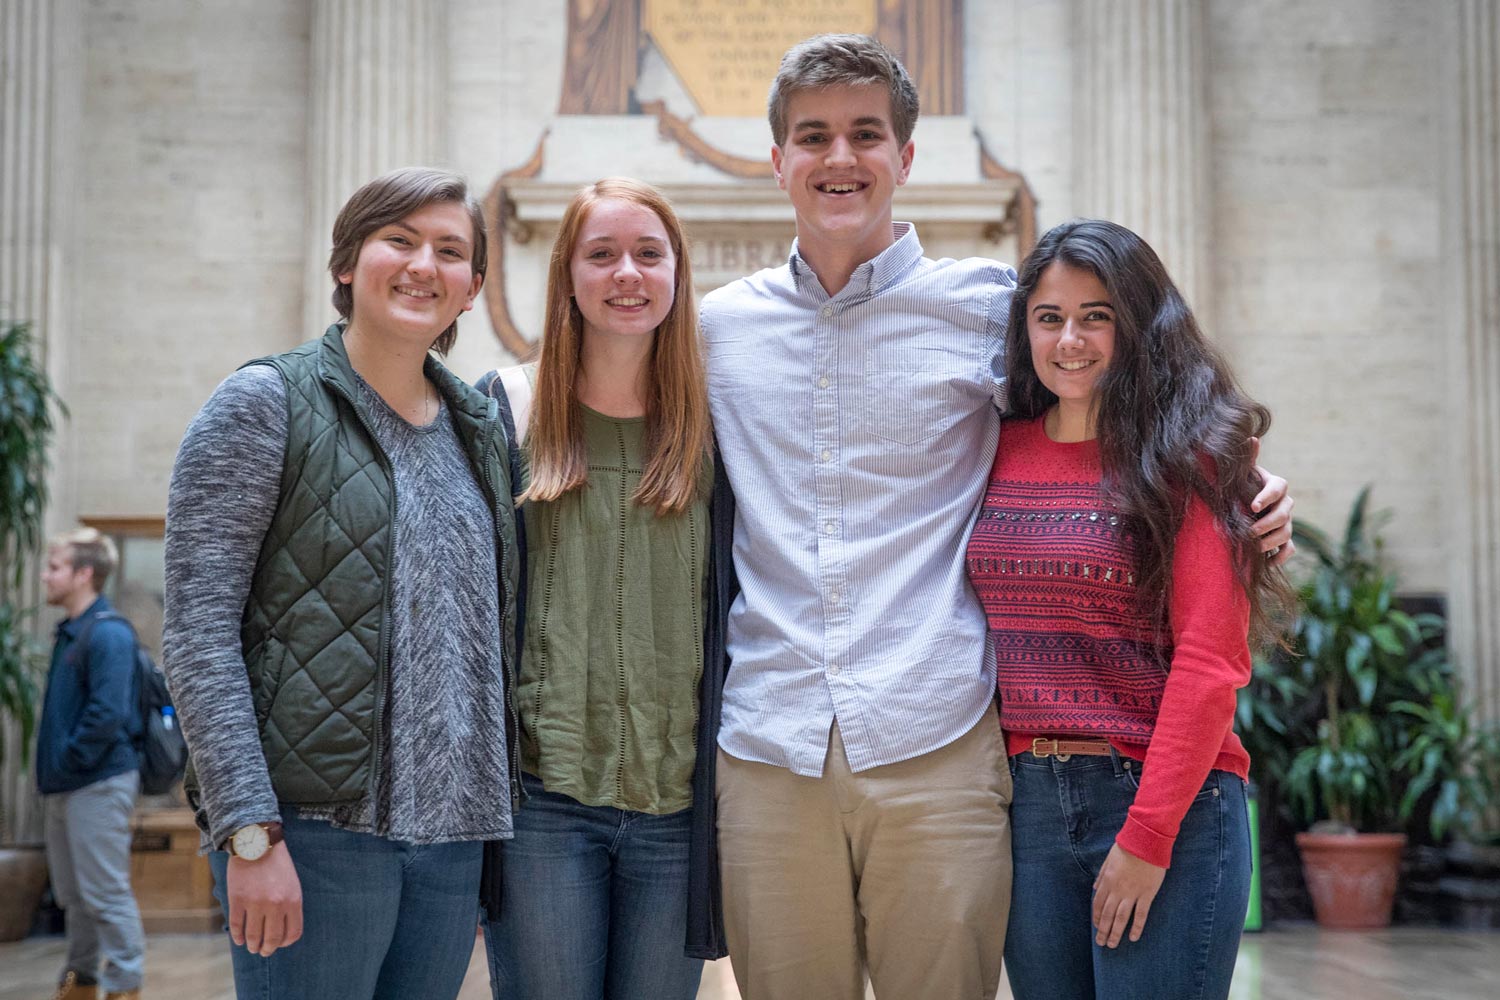 From left to right: Mary Grace Sheers, Jenna Wichterman, Jack Wilkins and Alexandra Dimas  stand together smiling at the camera